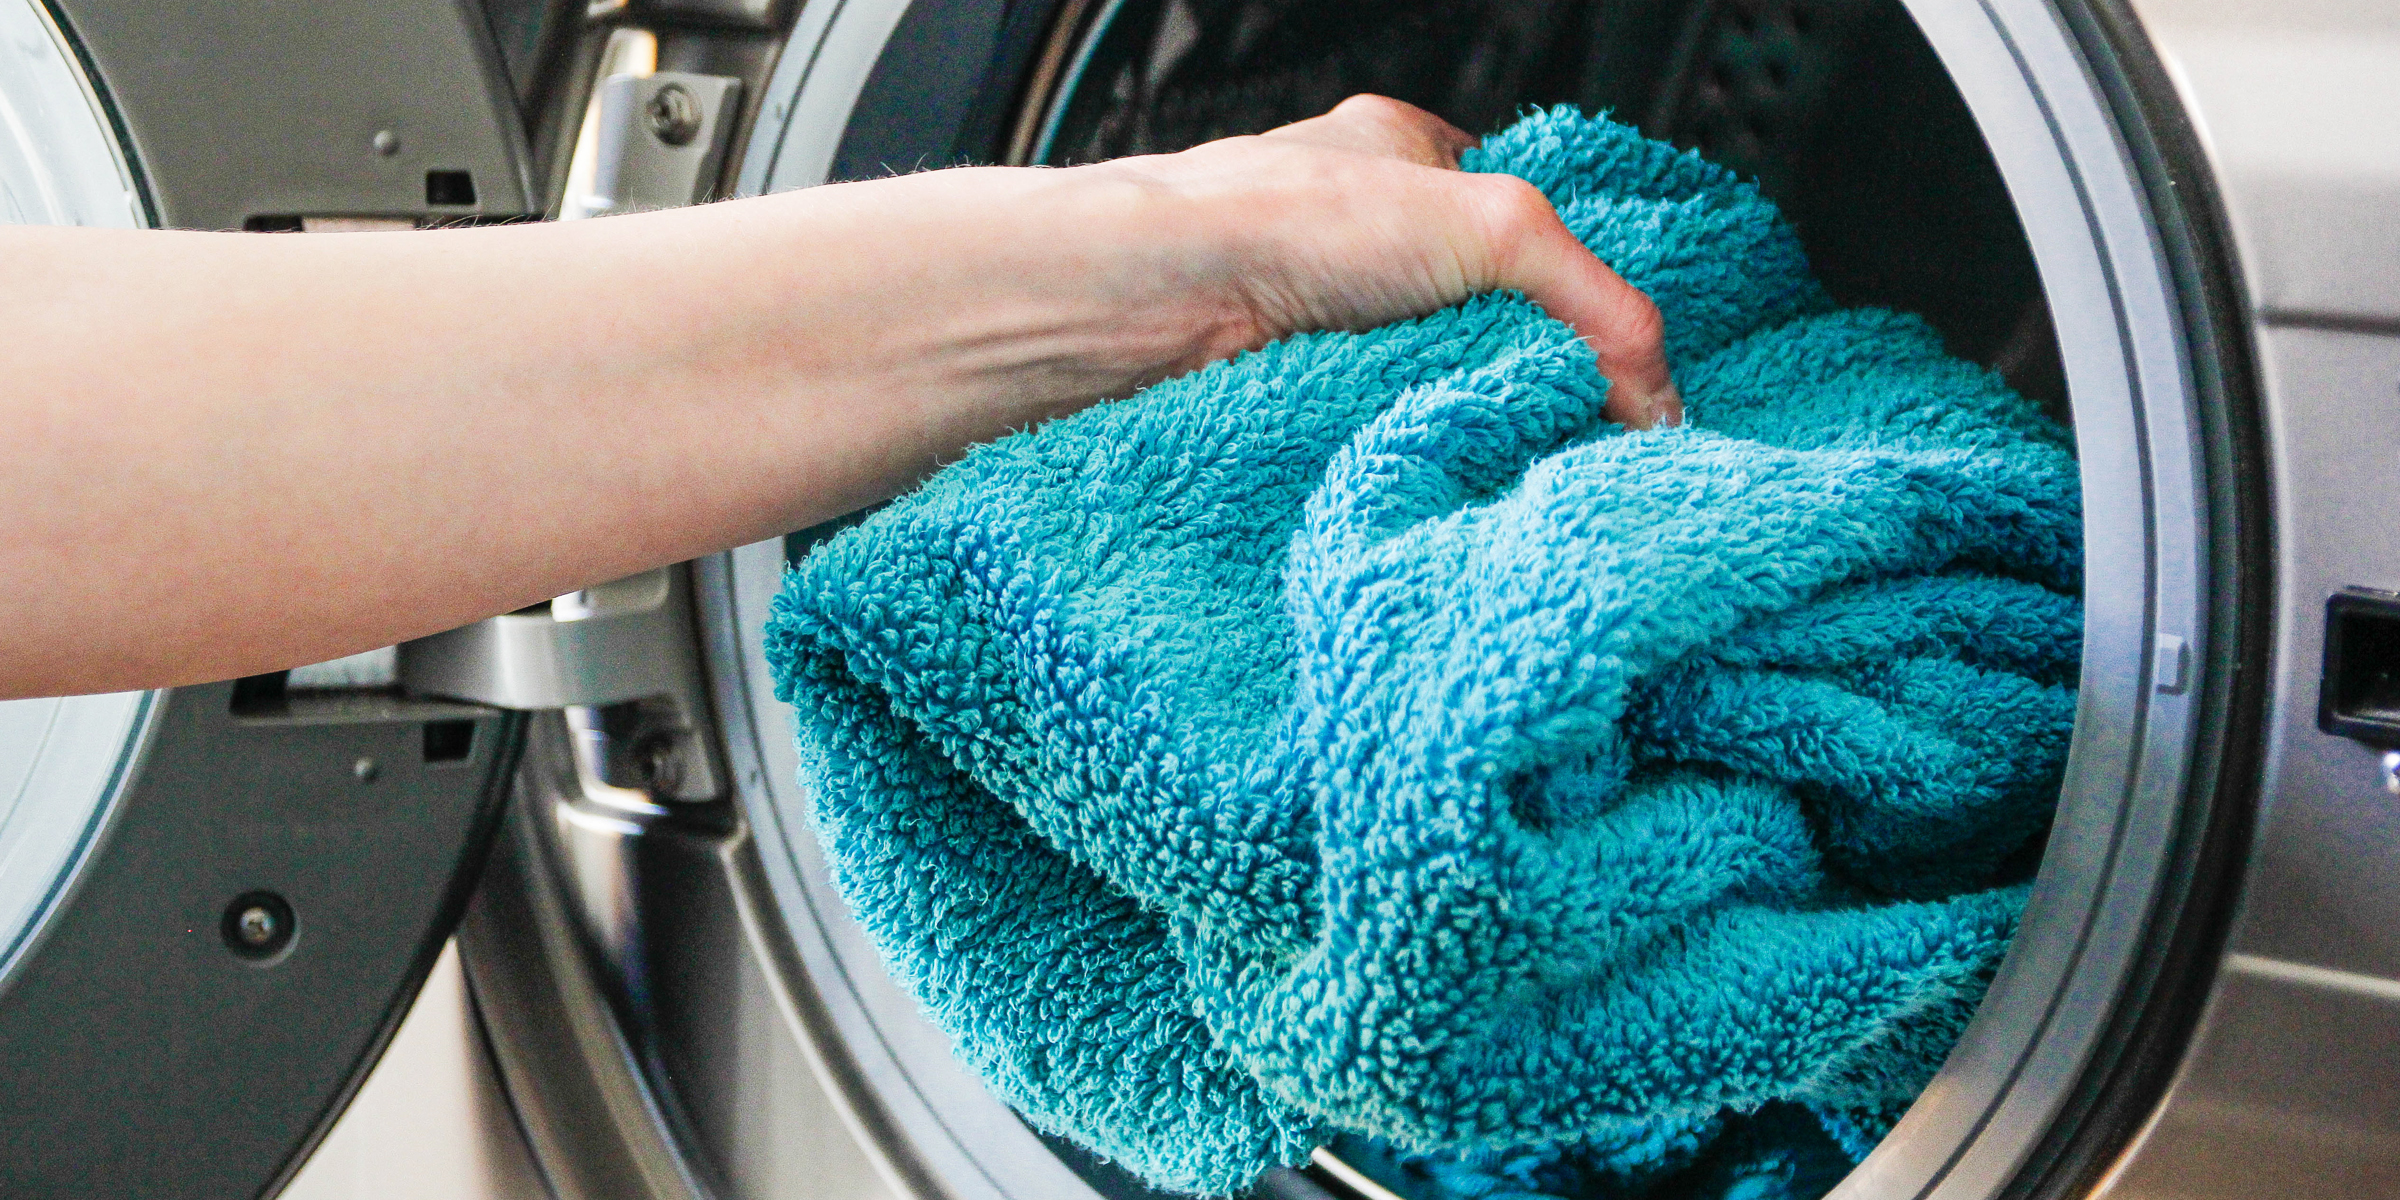 A person placing a towel into a dryer | Source: Getty Images